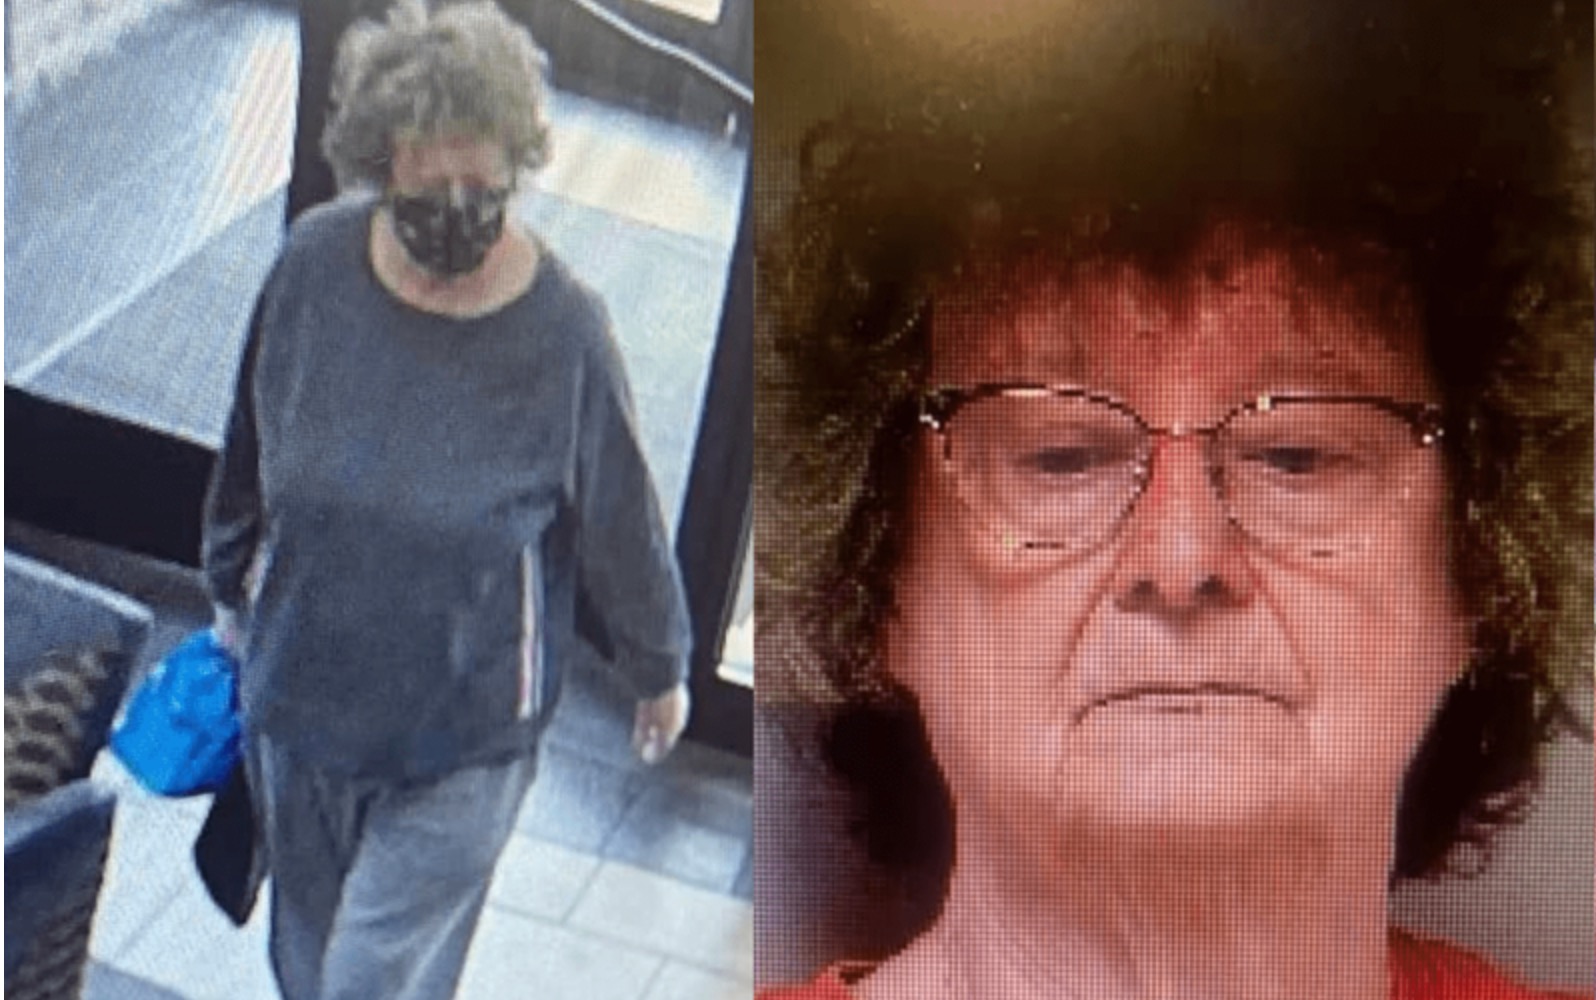 Footage Shows 74-Year-Old Woman Robbing Bank at Gunpoint - Watch Video